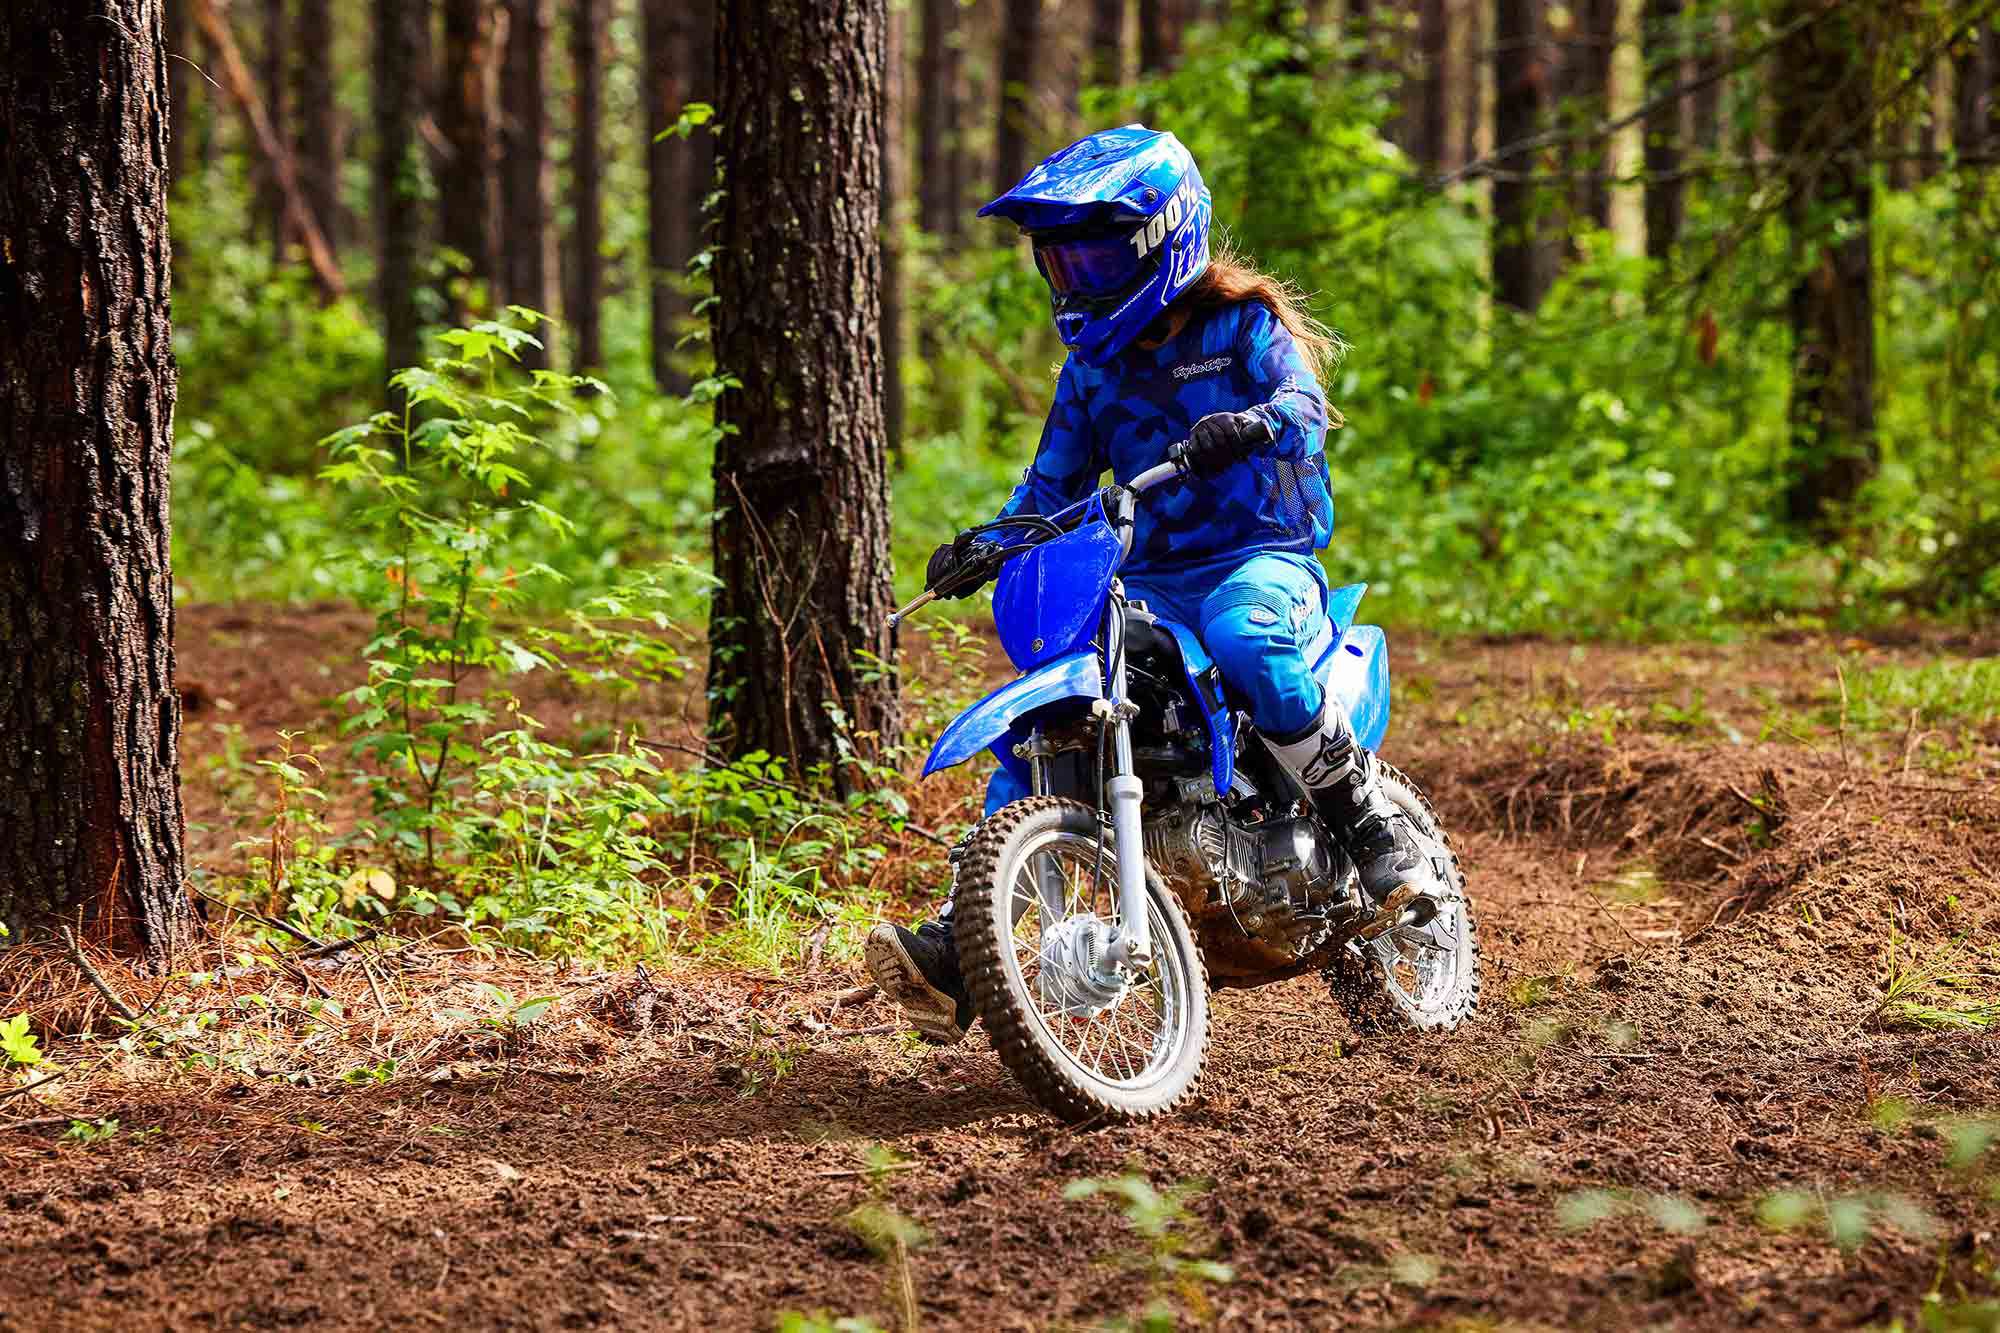 Yamaha and Honda have 110cc bikes that are ready for the next family trail ride.